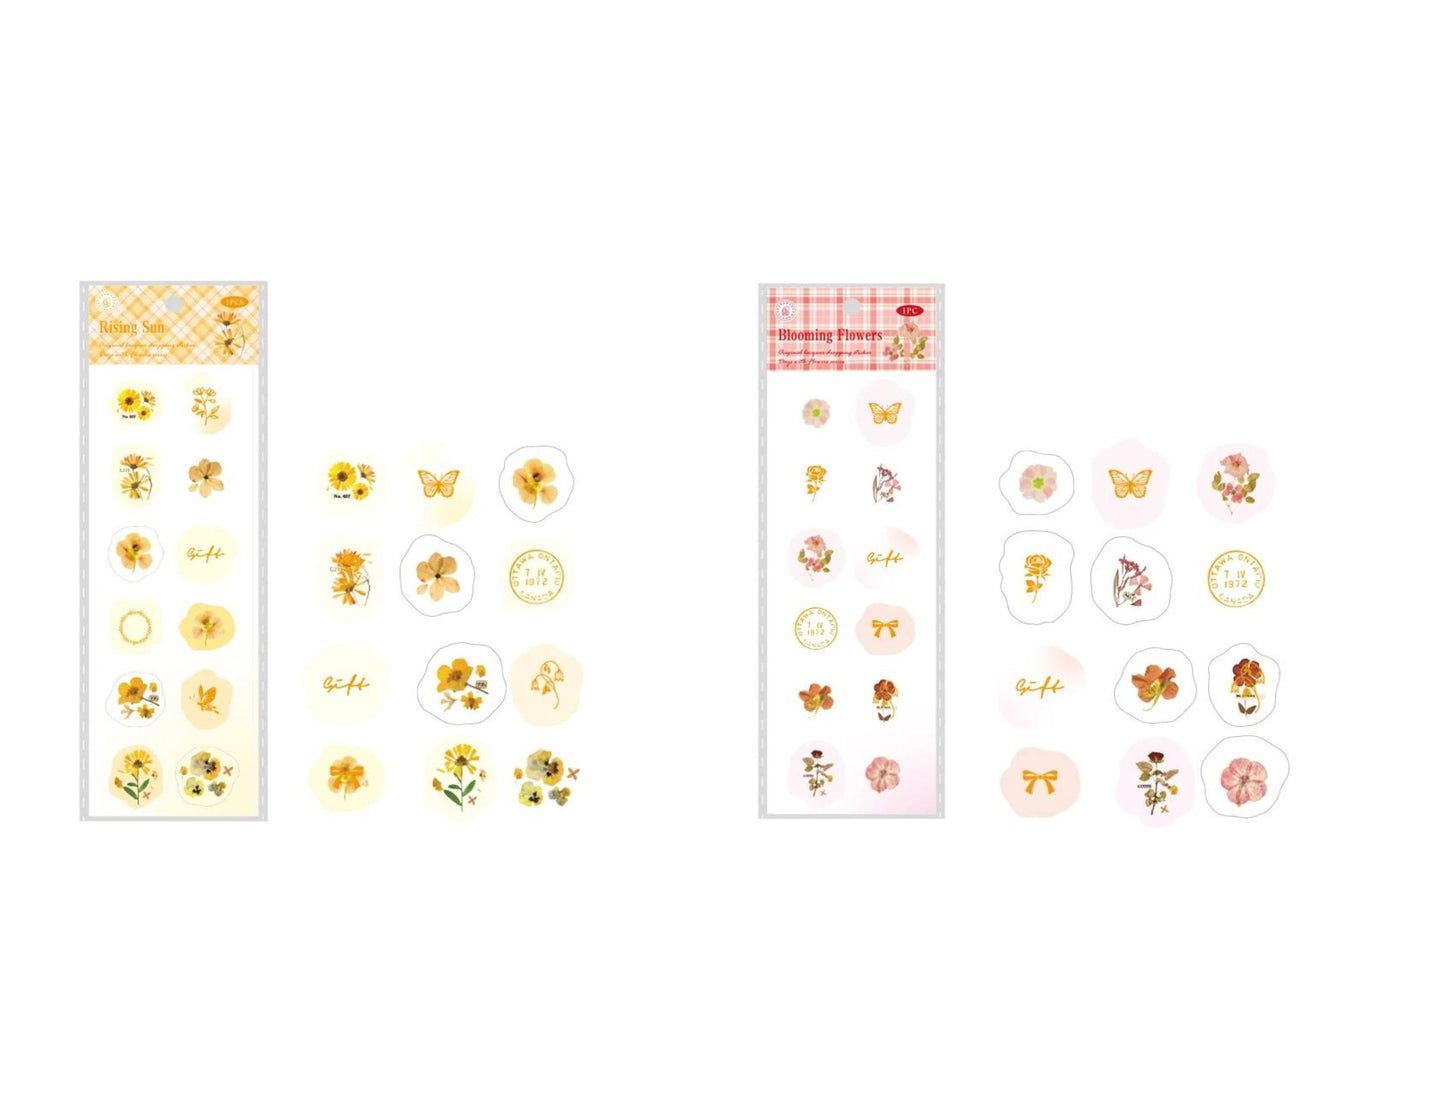 3d Floral Wax Seal Stickers, 16 Stickers, Wax Seals, Stationary Stickers, Kawaii Stickers